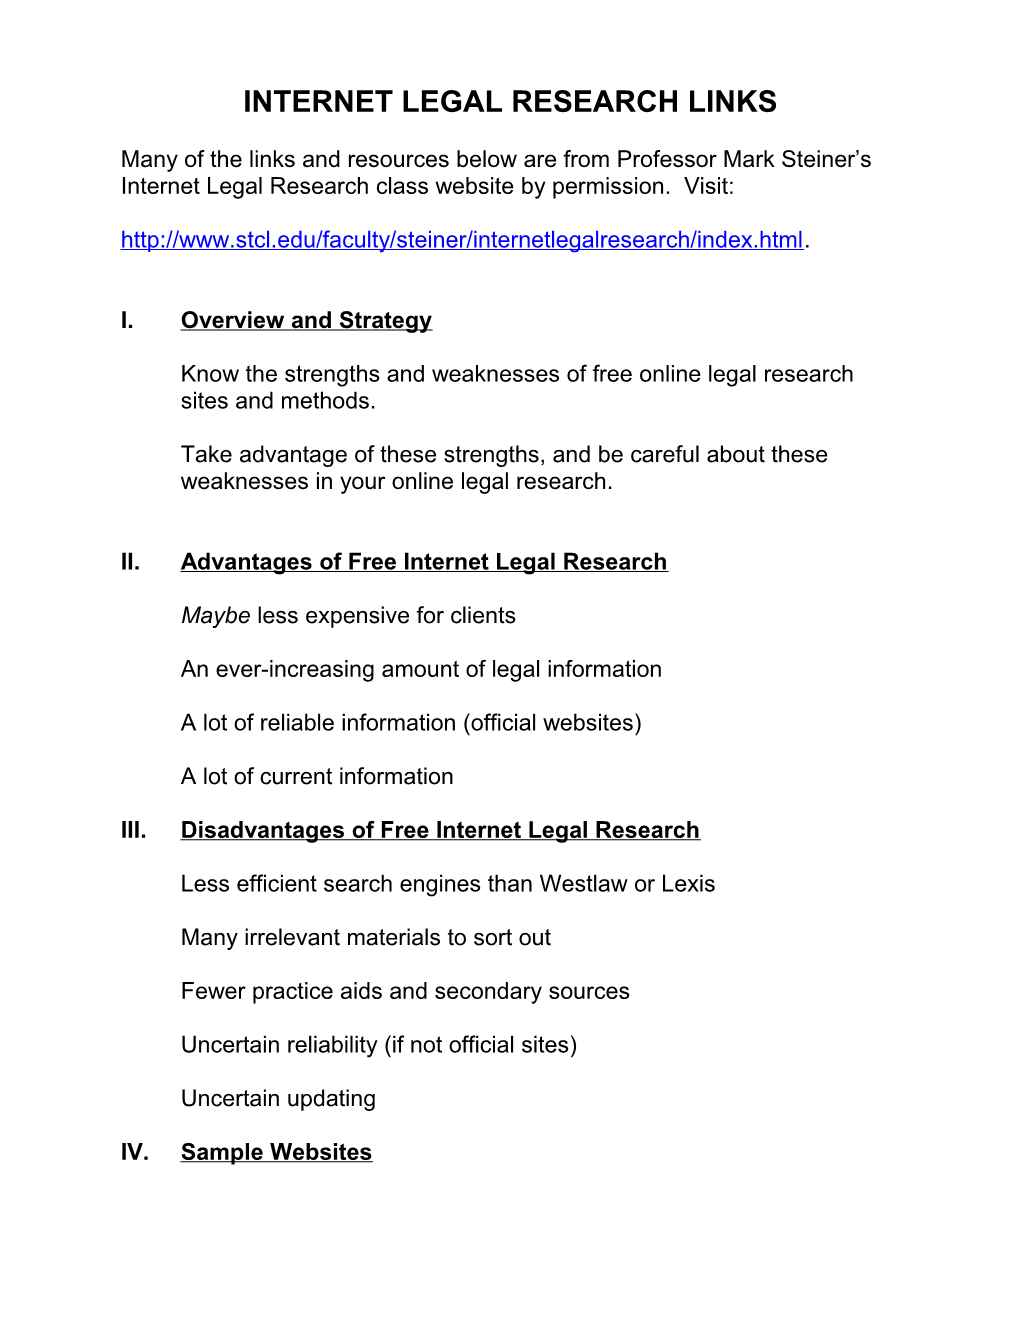 Internet Legal Research Links